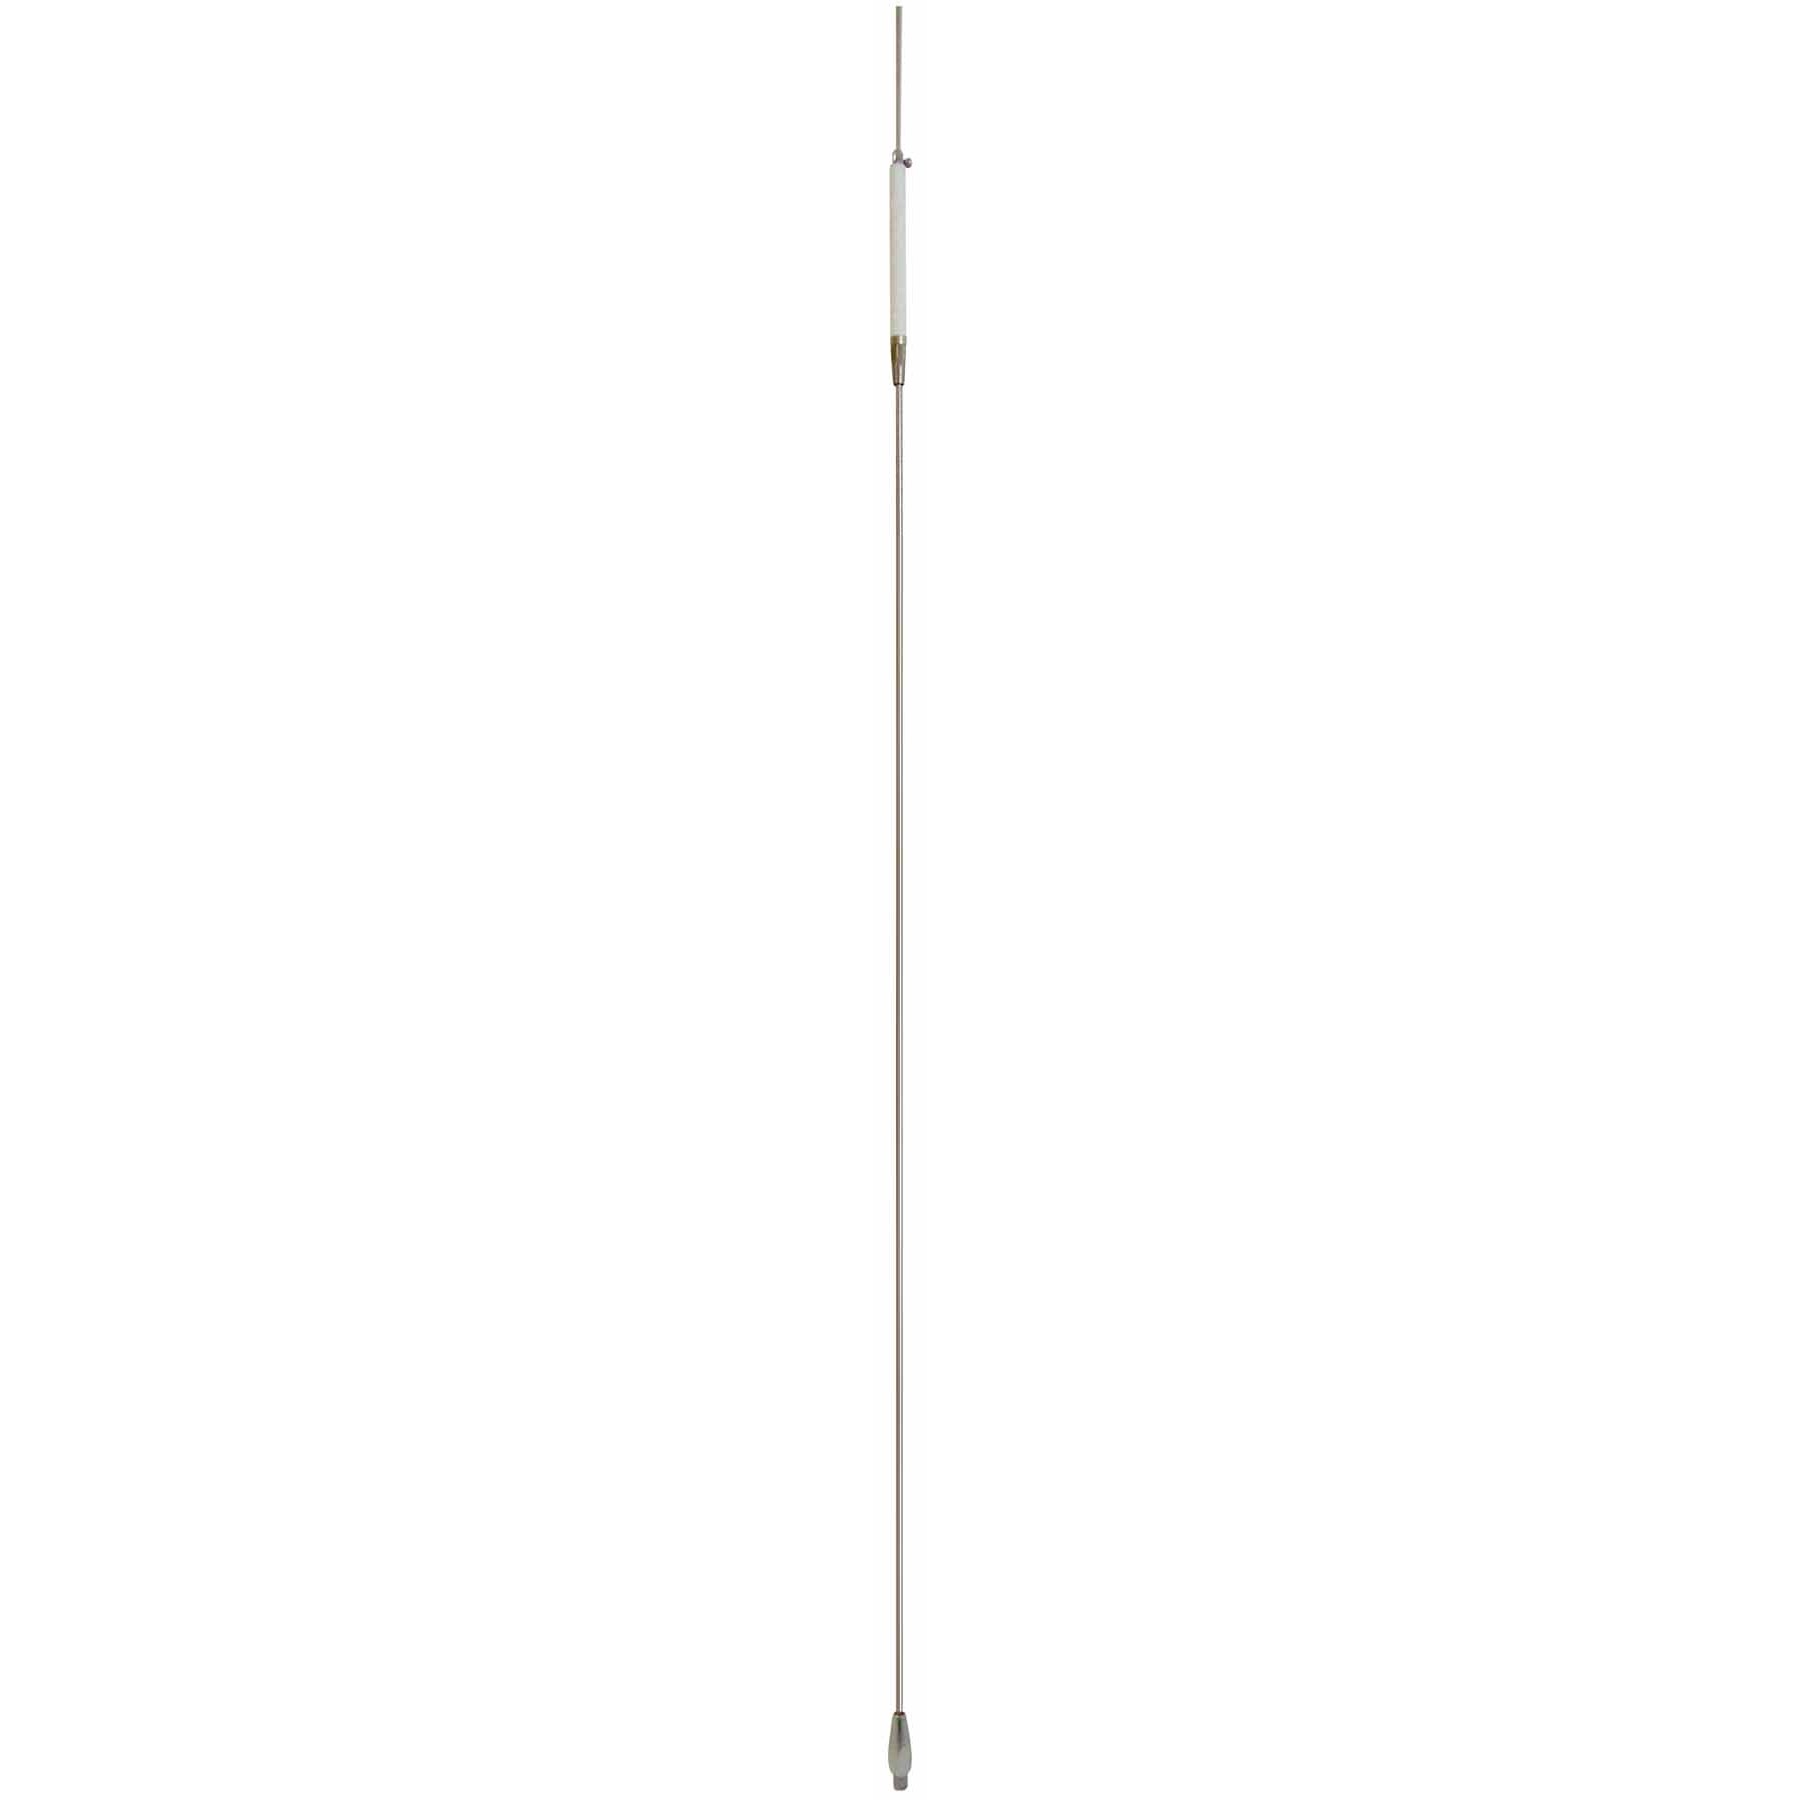 48" Center Load Cb Antenna With Stainless Mast